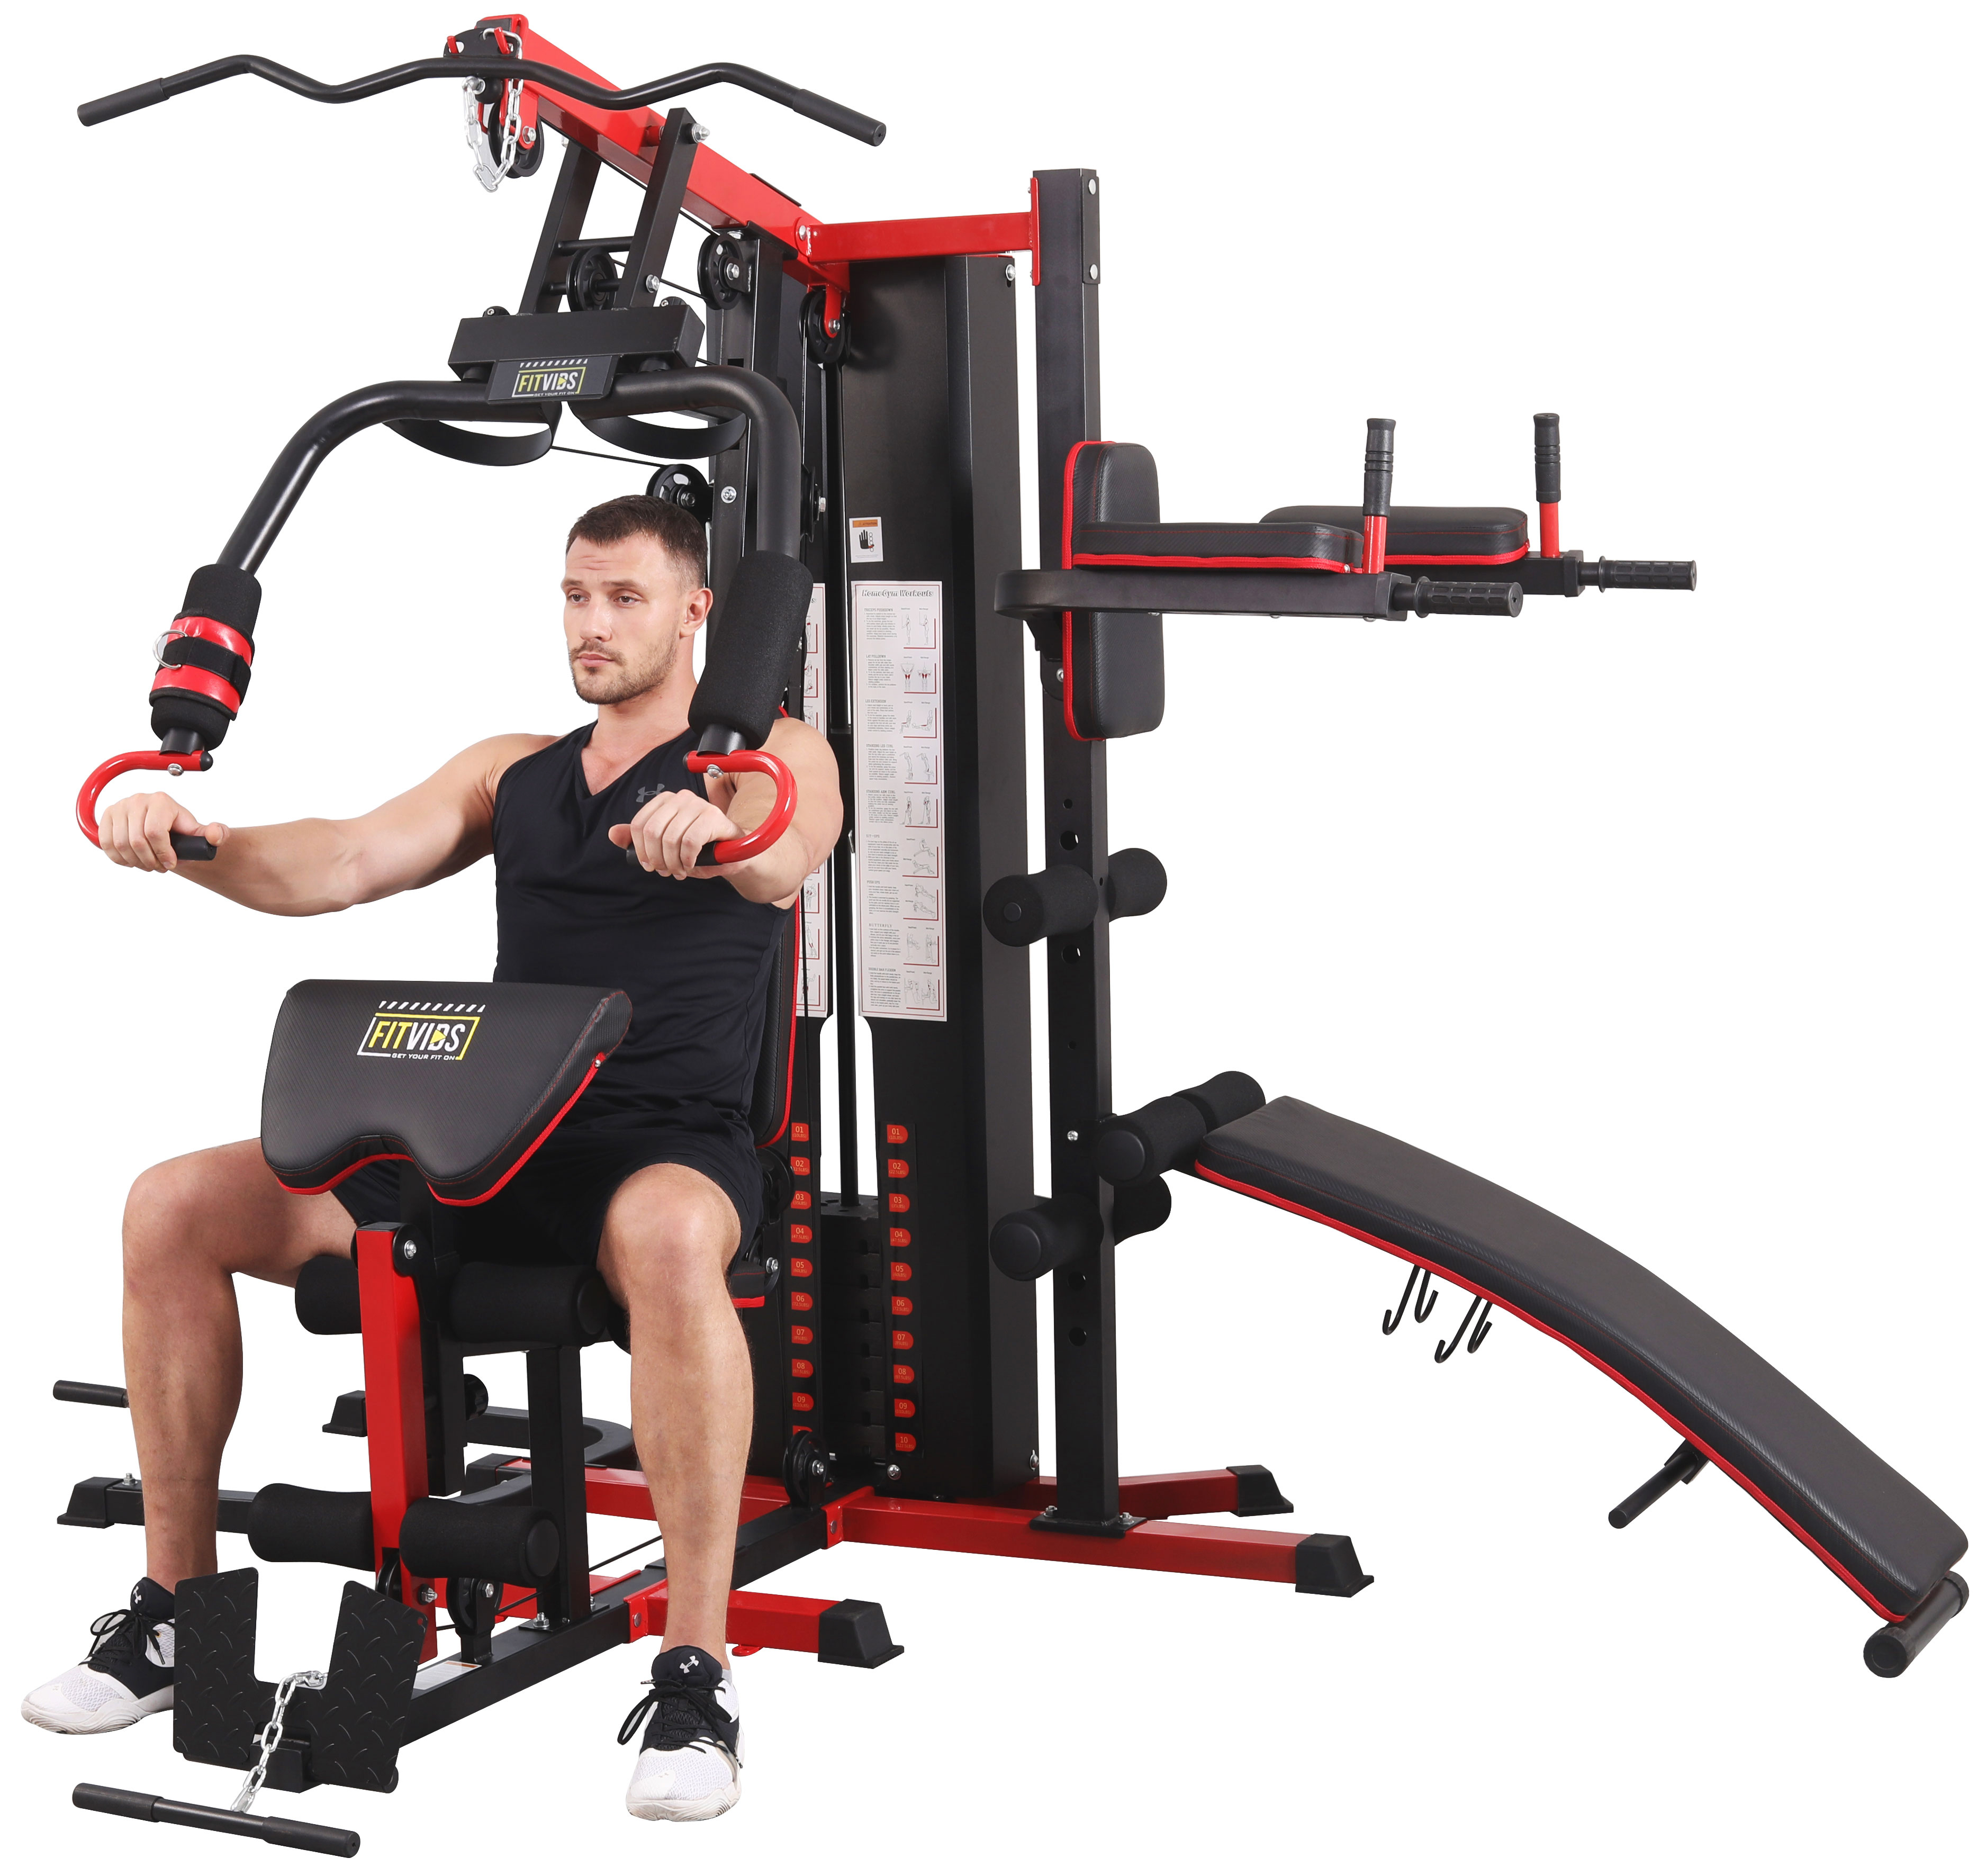 Fitvids LX900 Home Gym System Workout Station with 330 Lbs of Resistance, 122.5 Lbs Weight Stack, Three Station, Comes with Installation Instruction Video, Ships in 7 Boxes - image 1 of 13